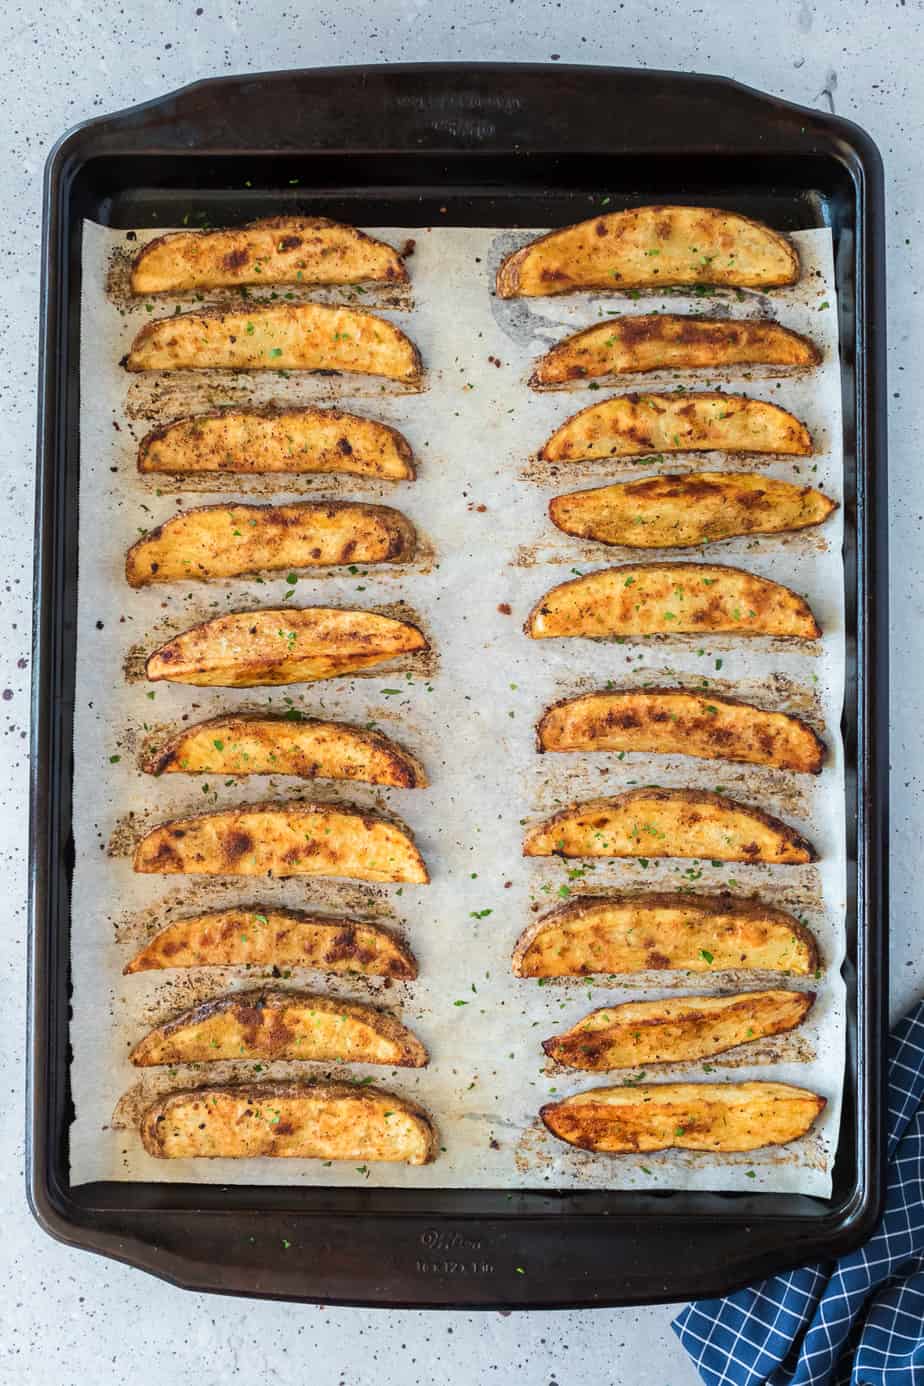 Crispy potato wedges on the pan evenly spaced after baking